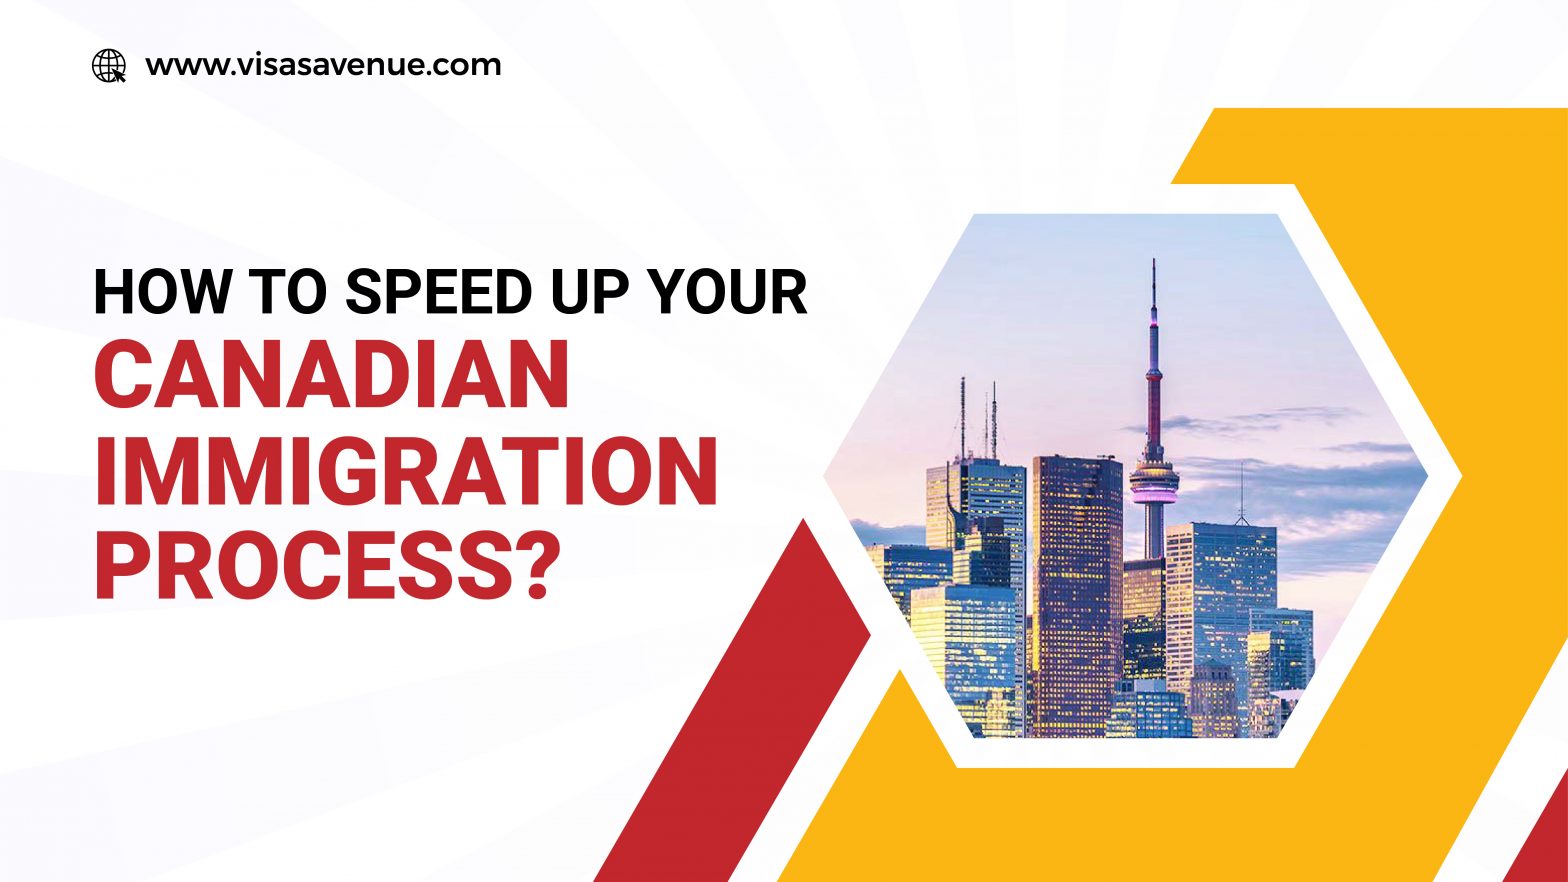 How to Speed up your Canadian Immigration Process